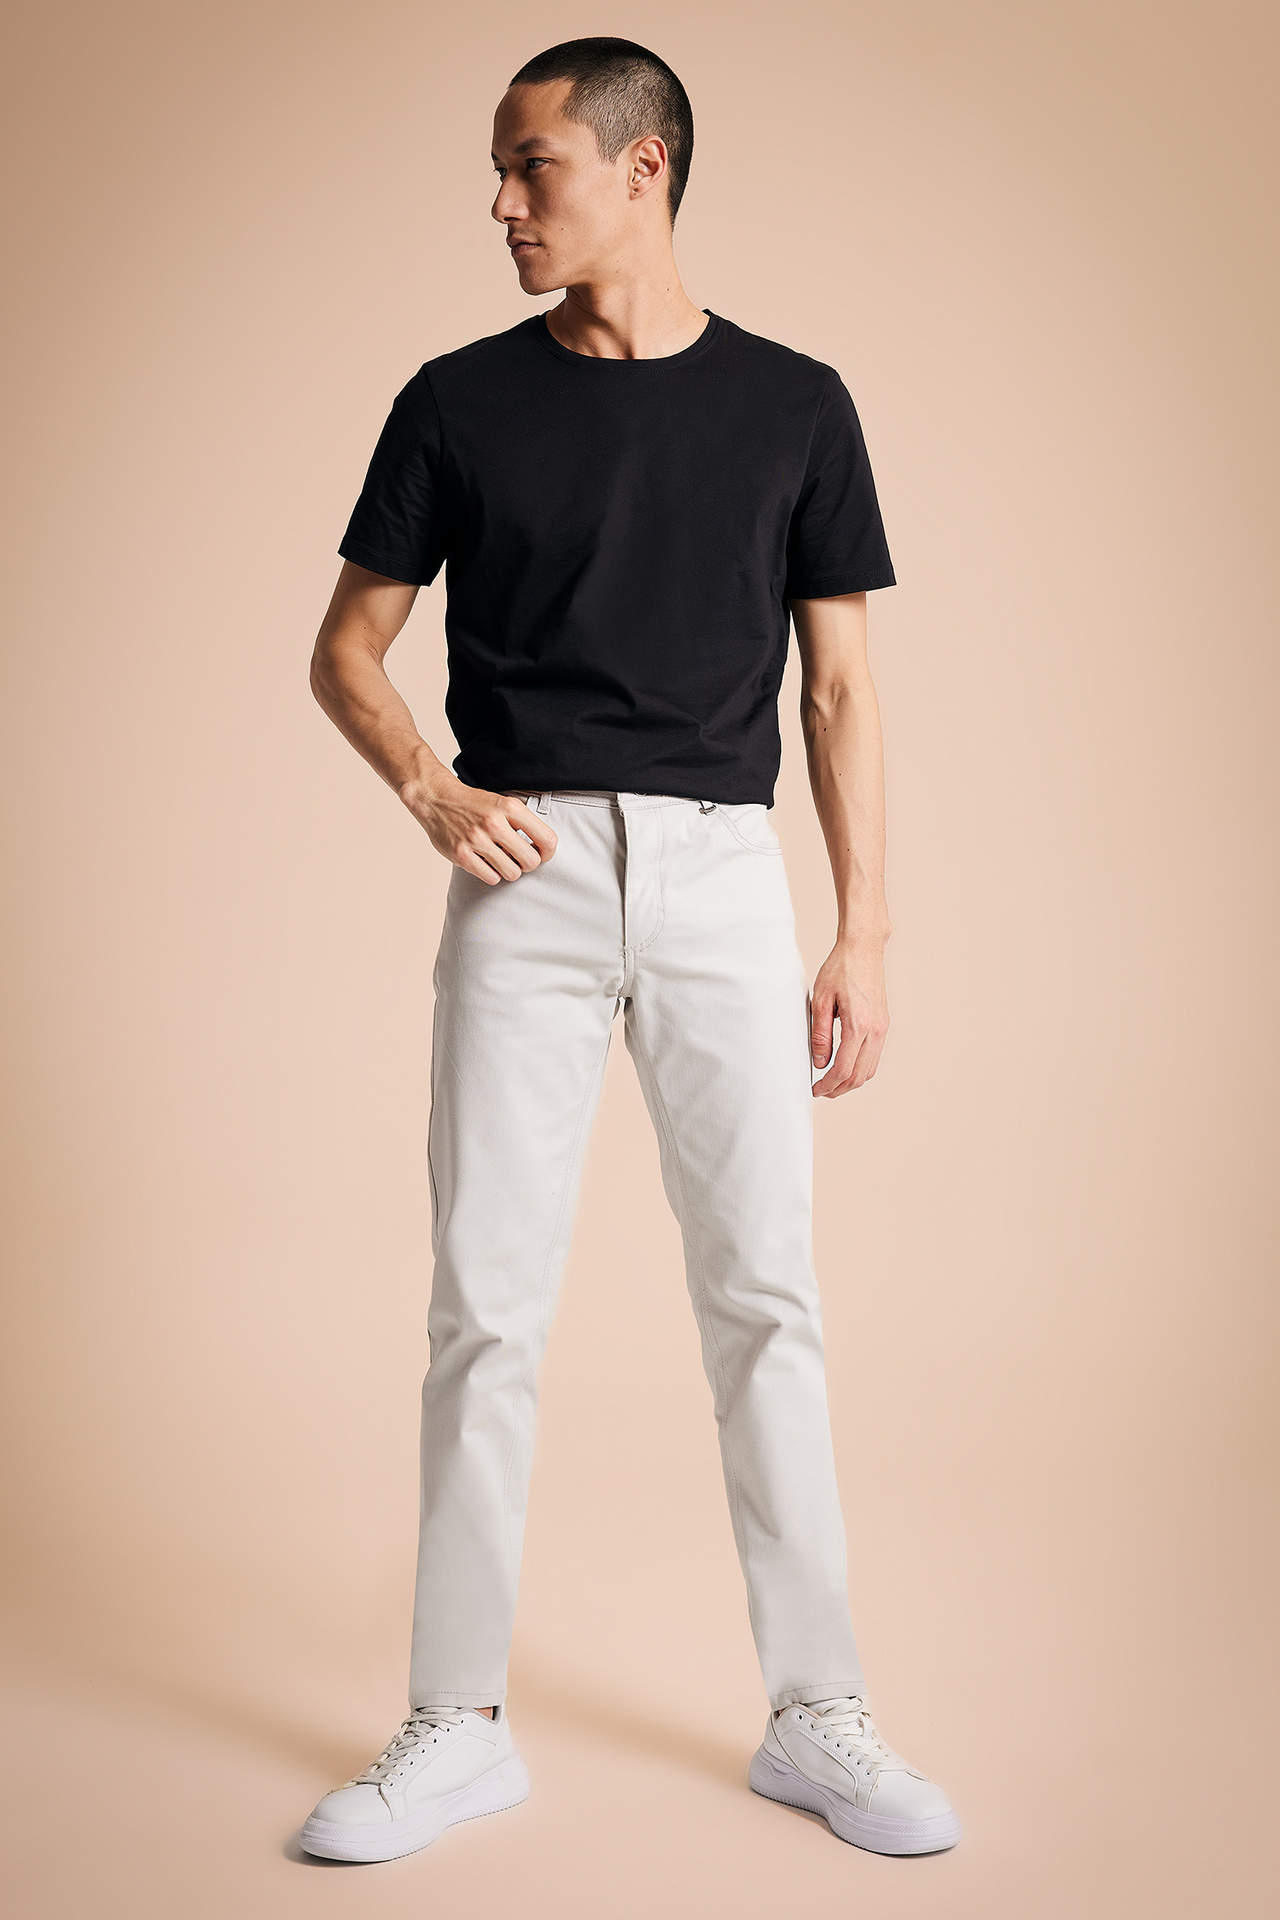 DEFACTO Extra Slim Fit Chino Pants